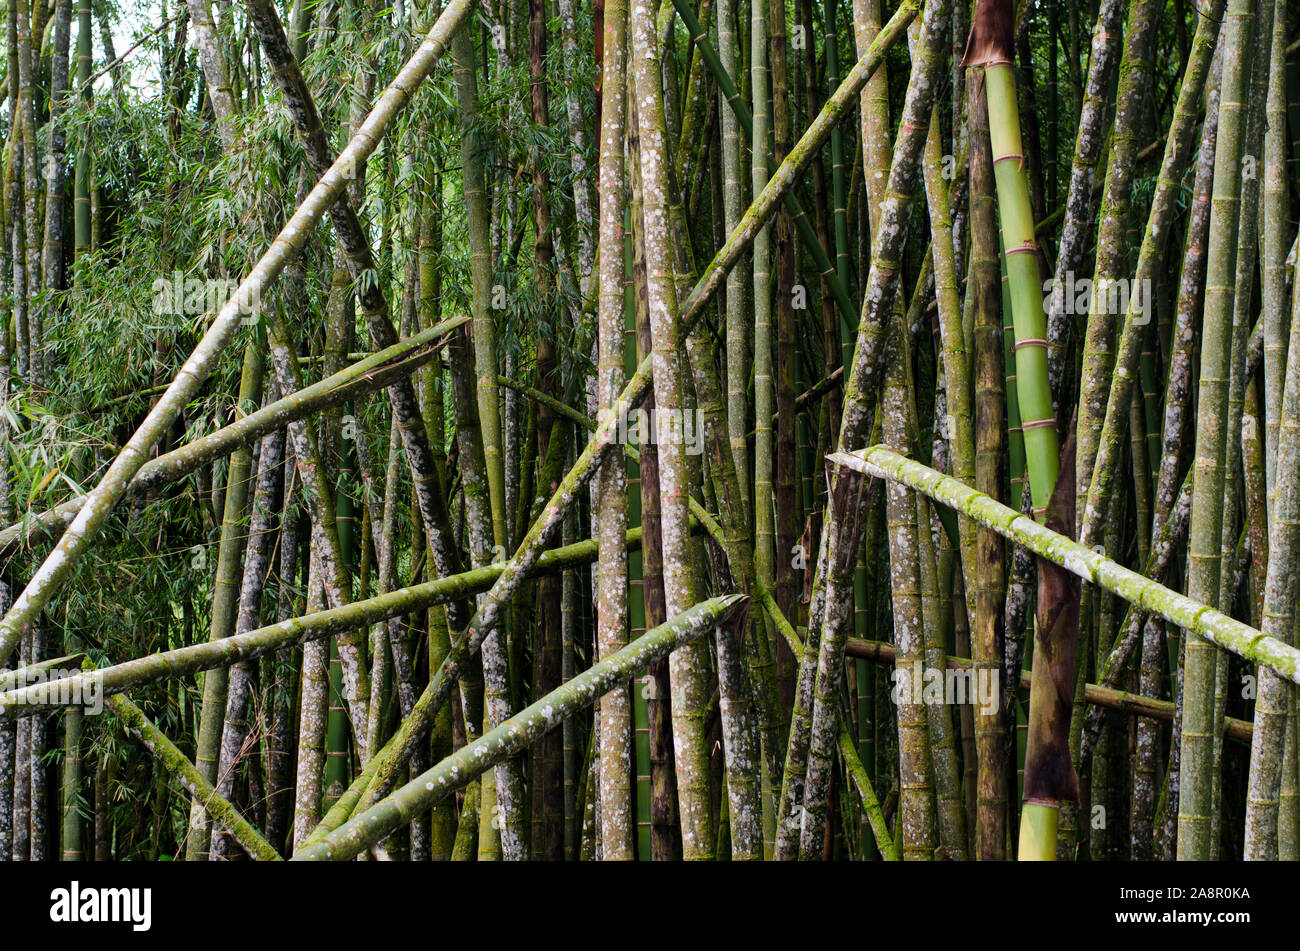 Guadua angusifolia, the largest neotropical bamboo with fungus on its surface Stock Photo